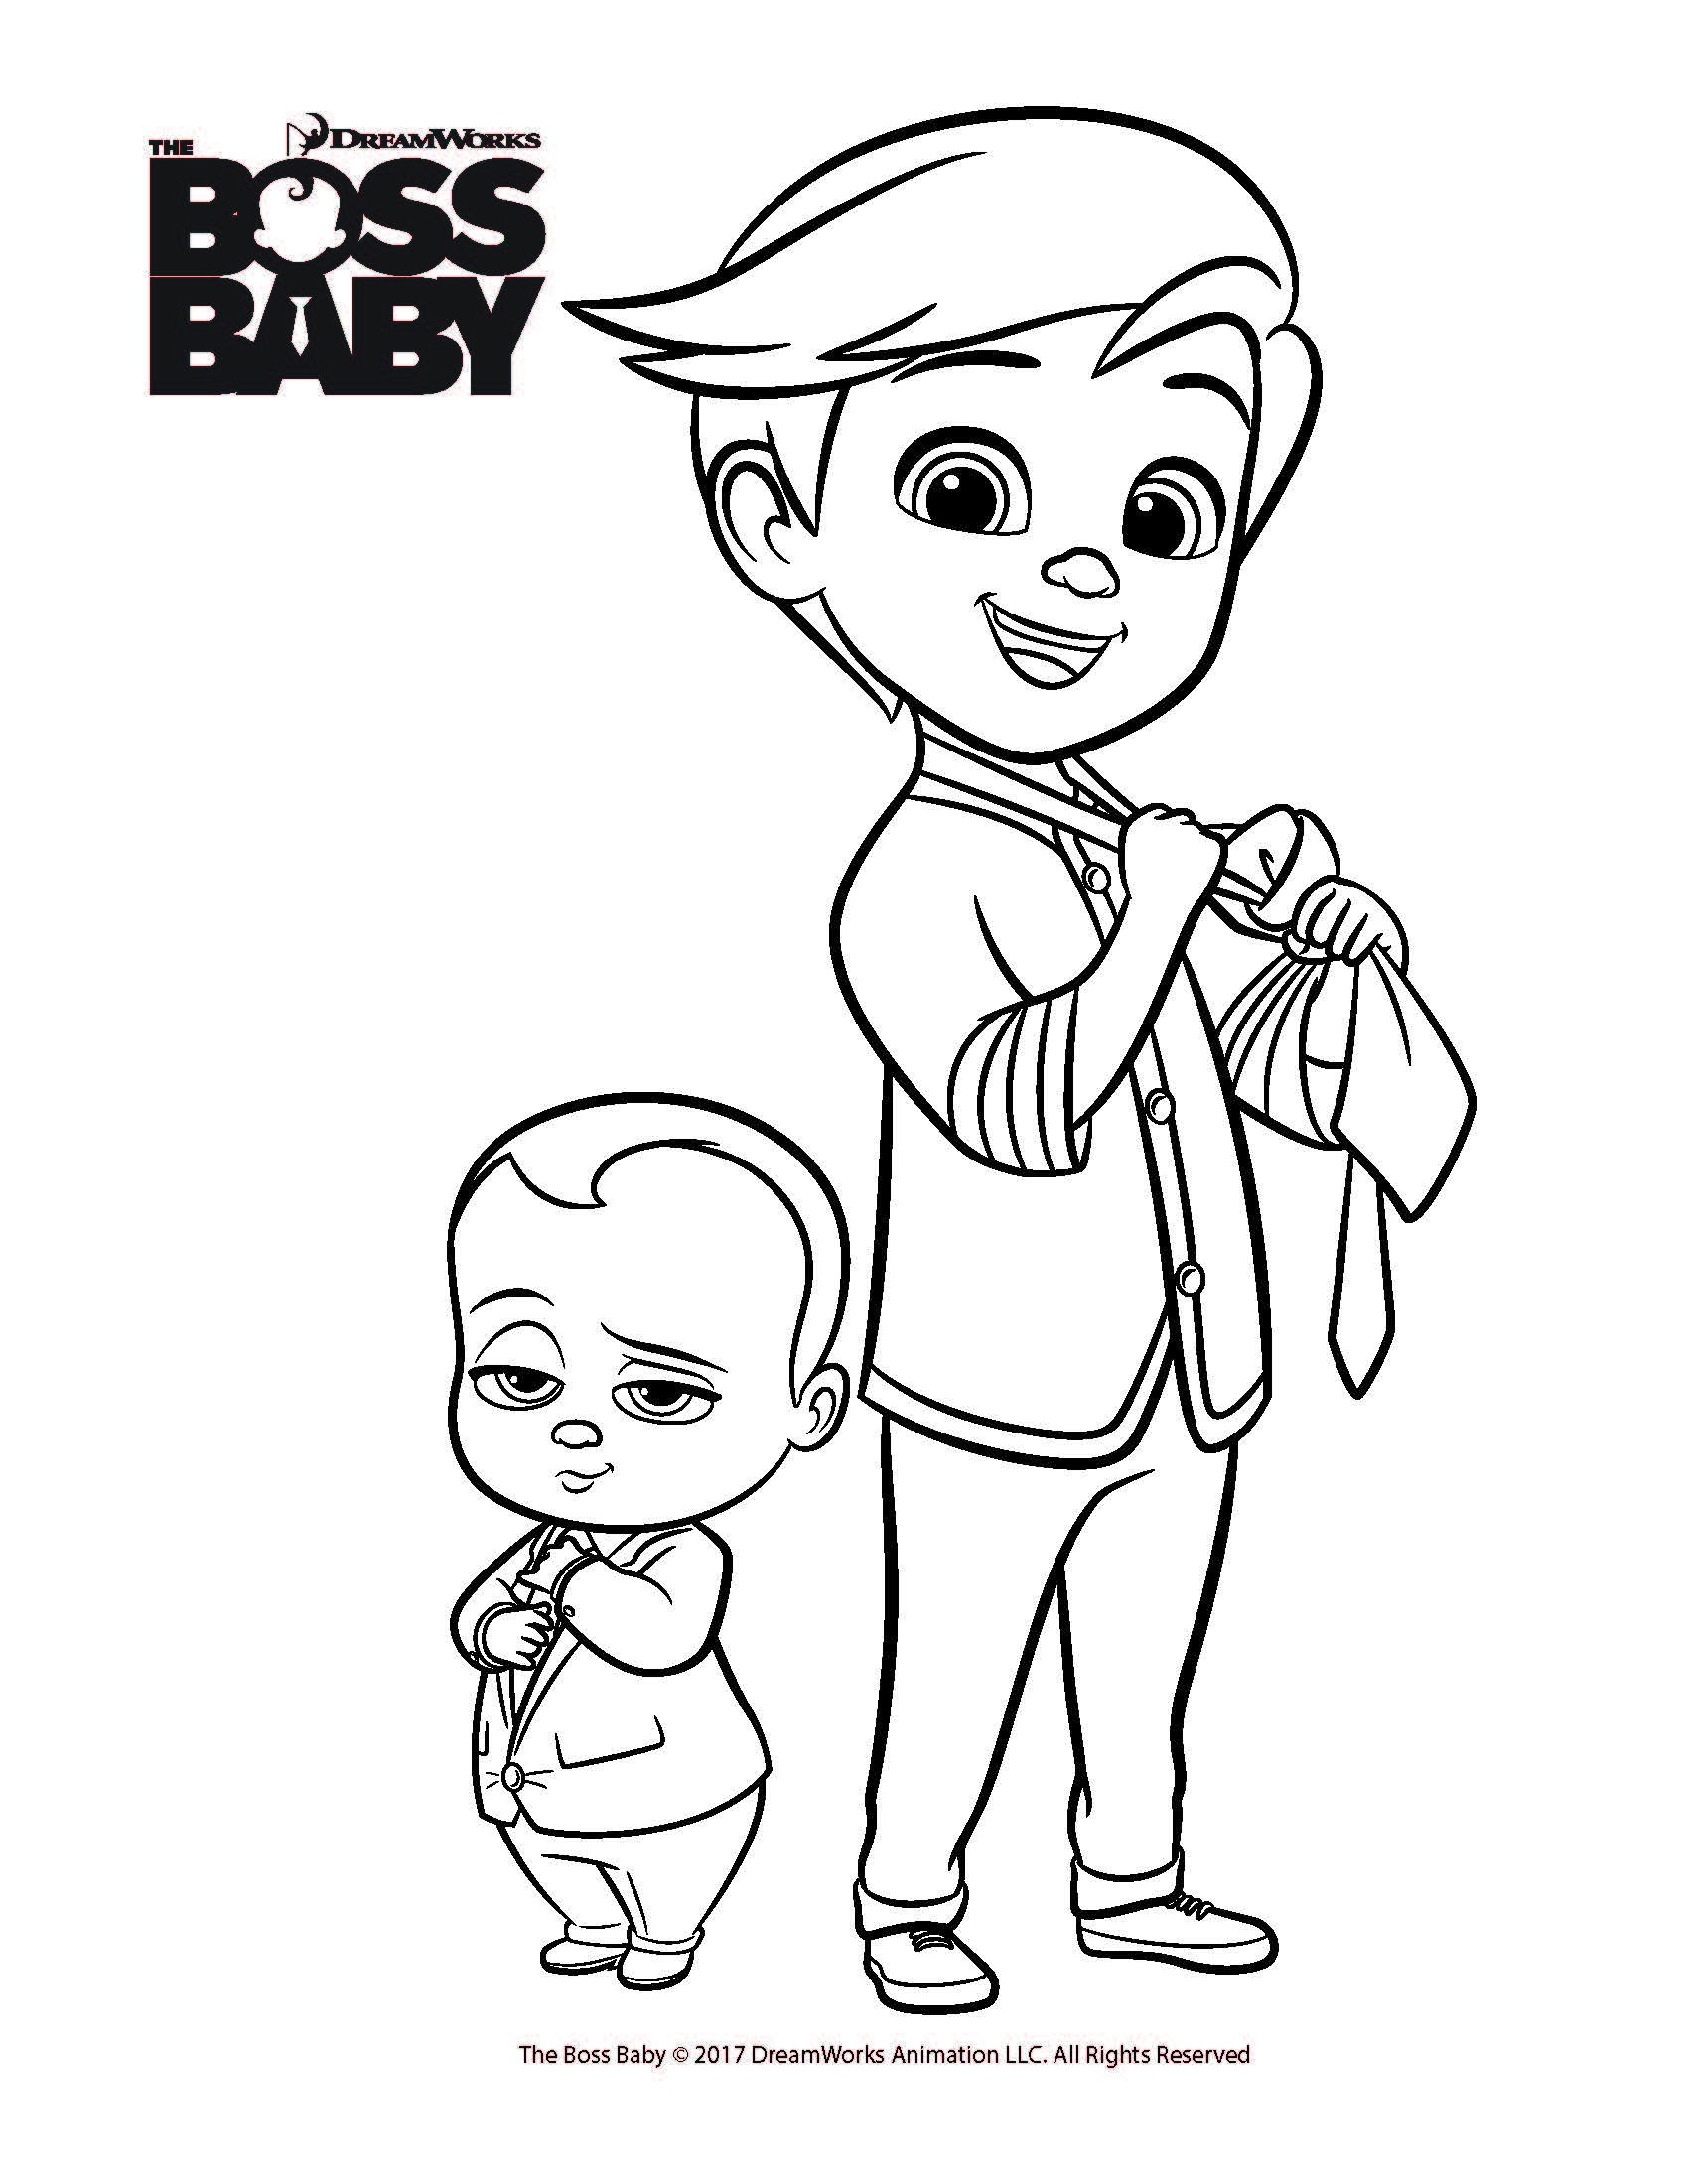 Boss Baby Coloring Page
 Boss Baby printables Free coloring printables for The